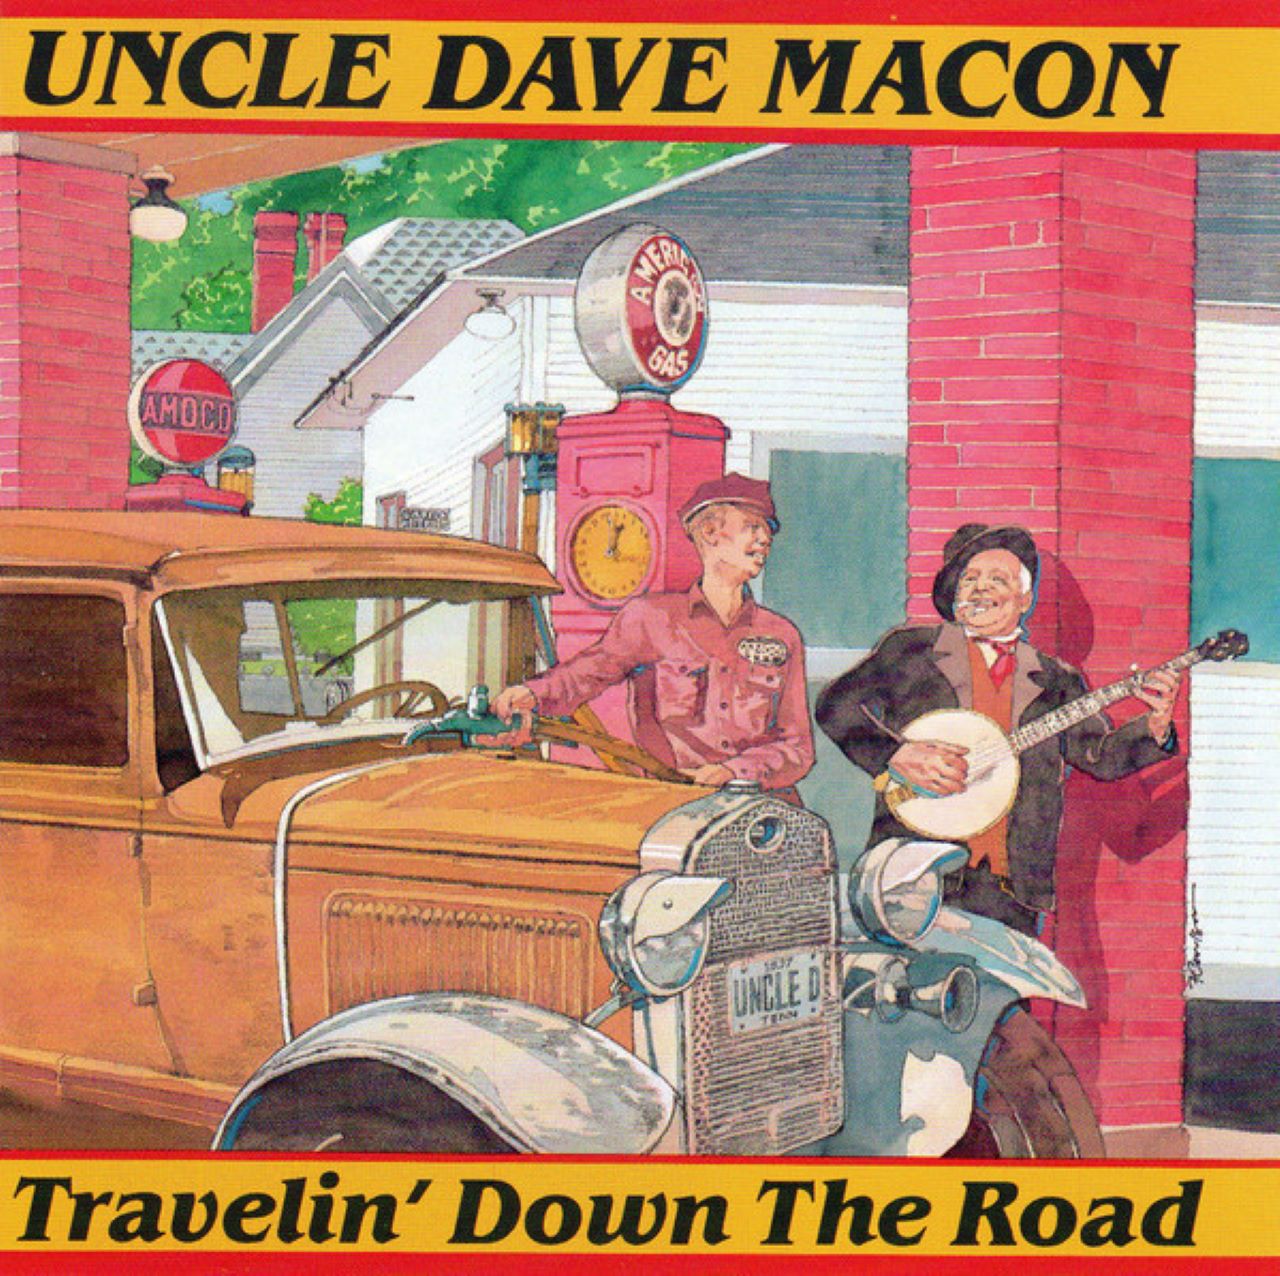 Uncle Dave Macon - Travelin’ Down The Road cover album